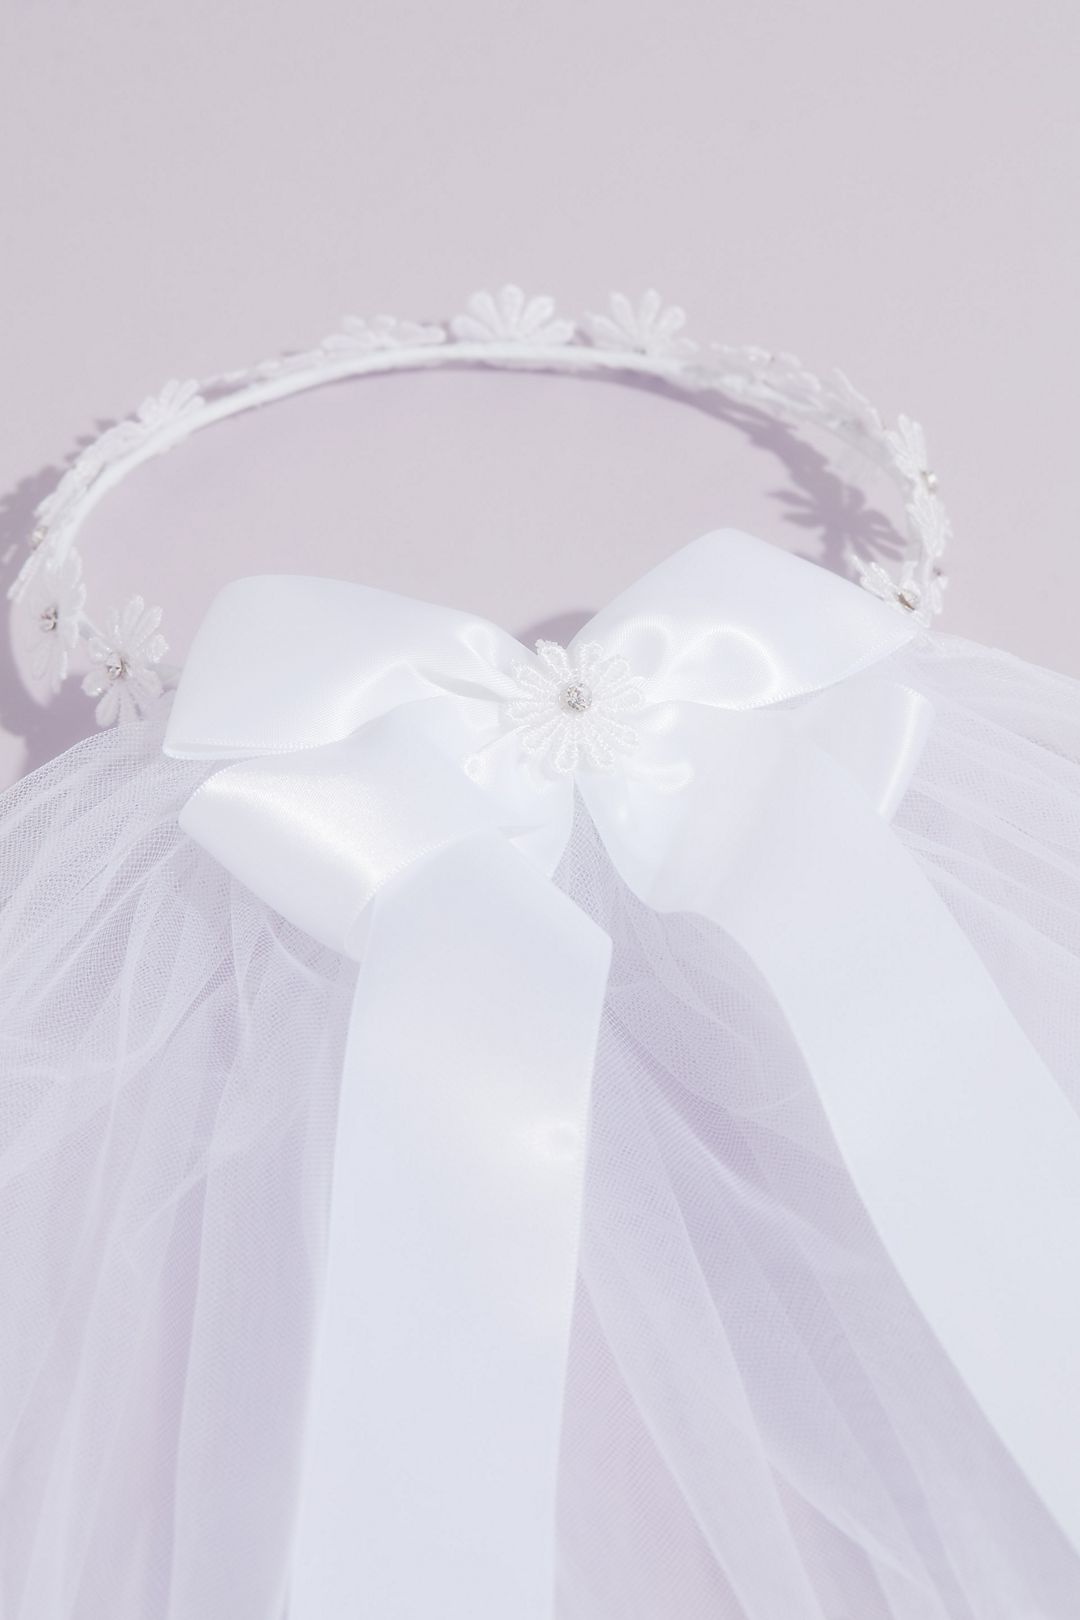 Daisy Chain Two Tier Communion Veil with Bow Image 2